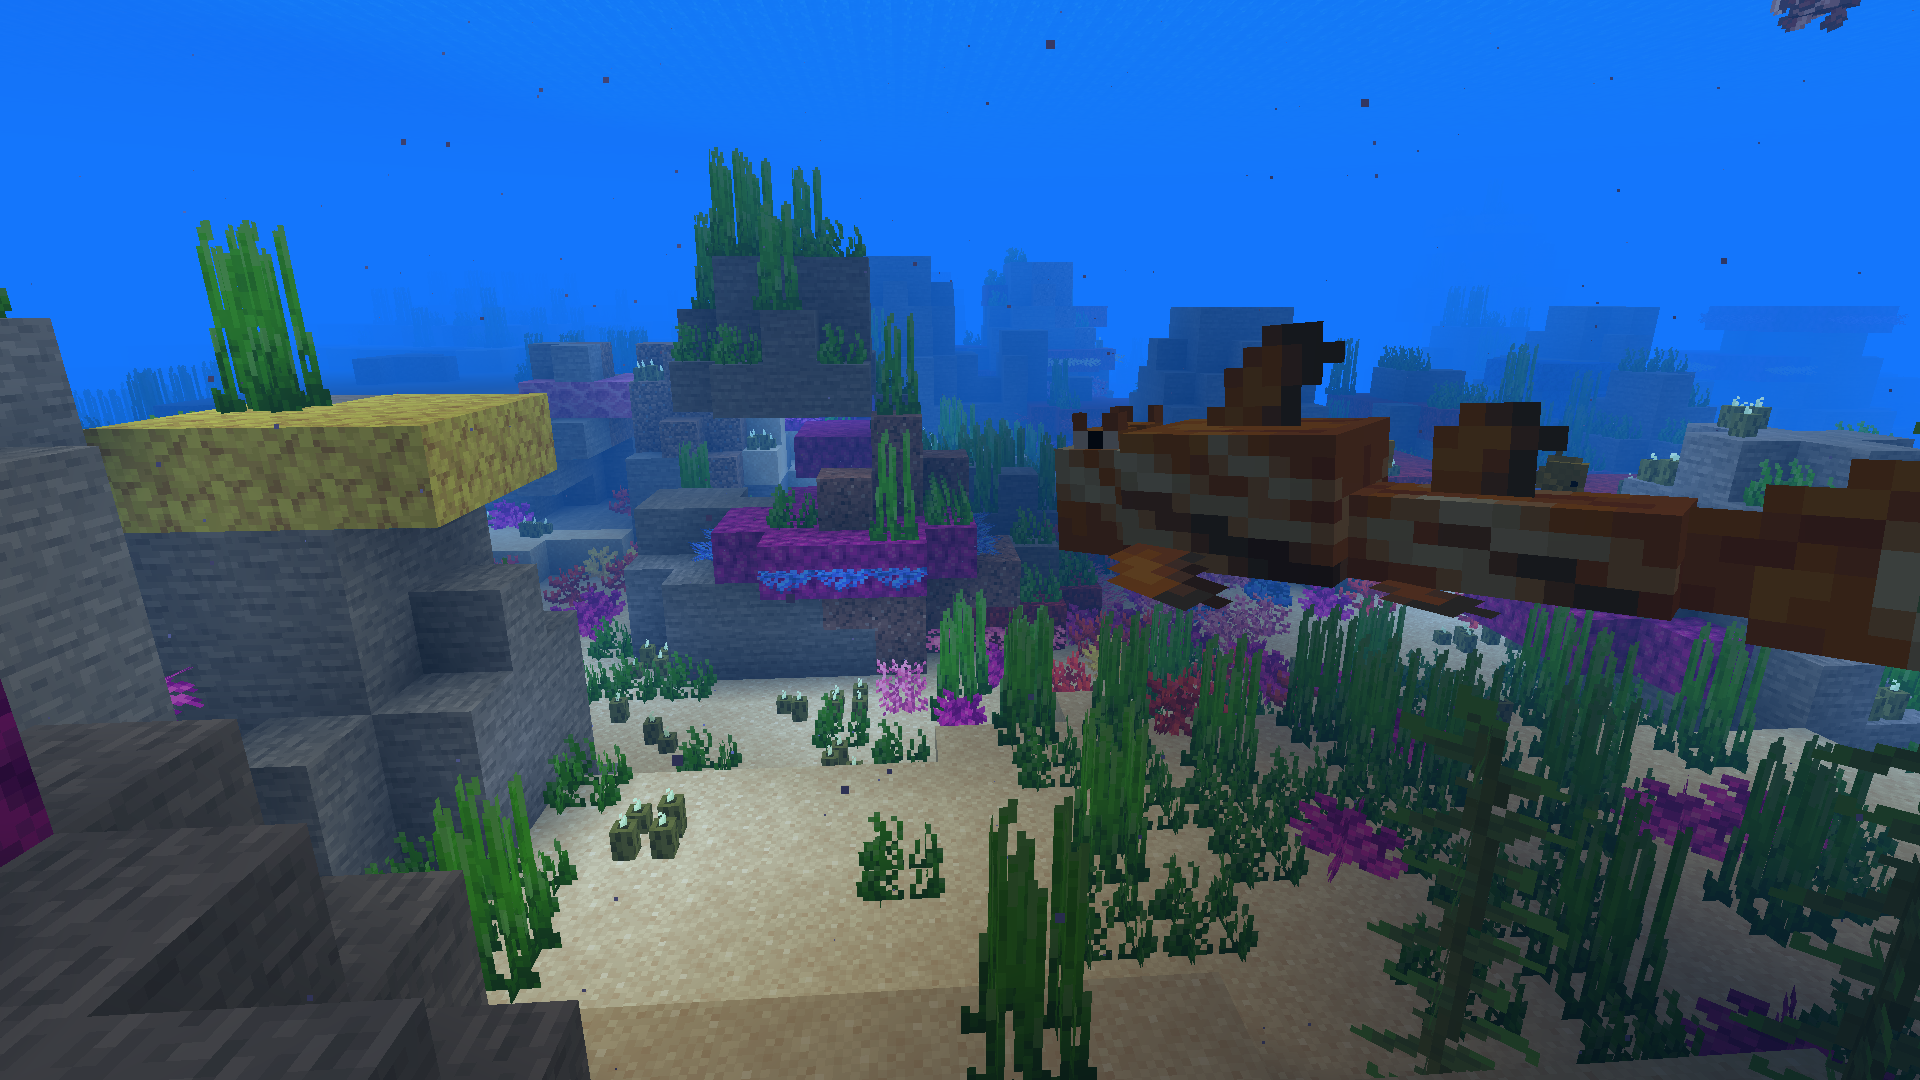 A Clownthorn shark in the reef